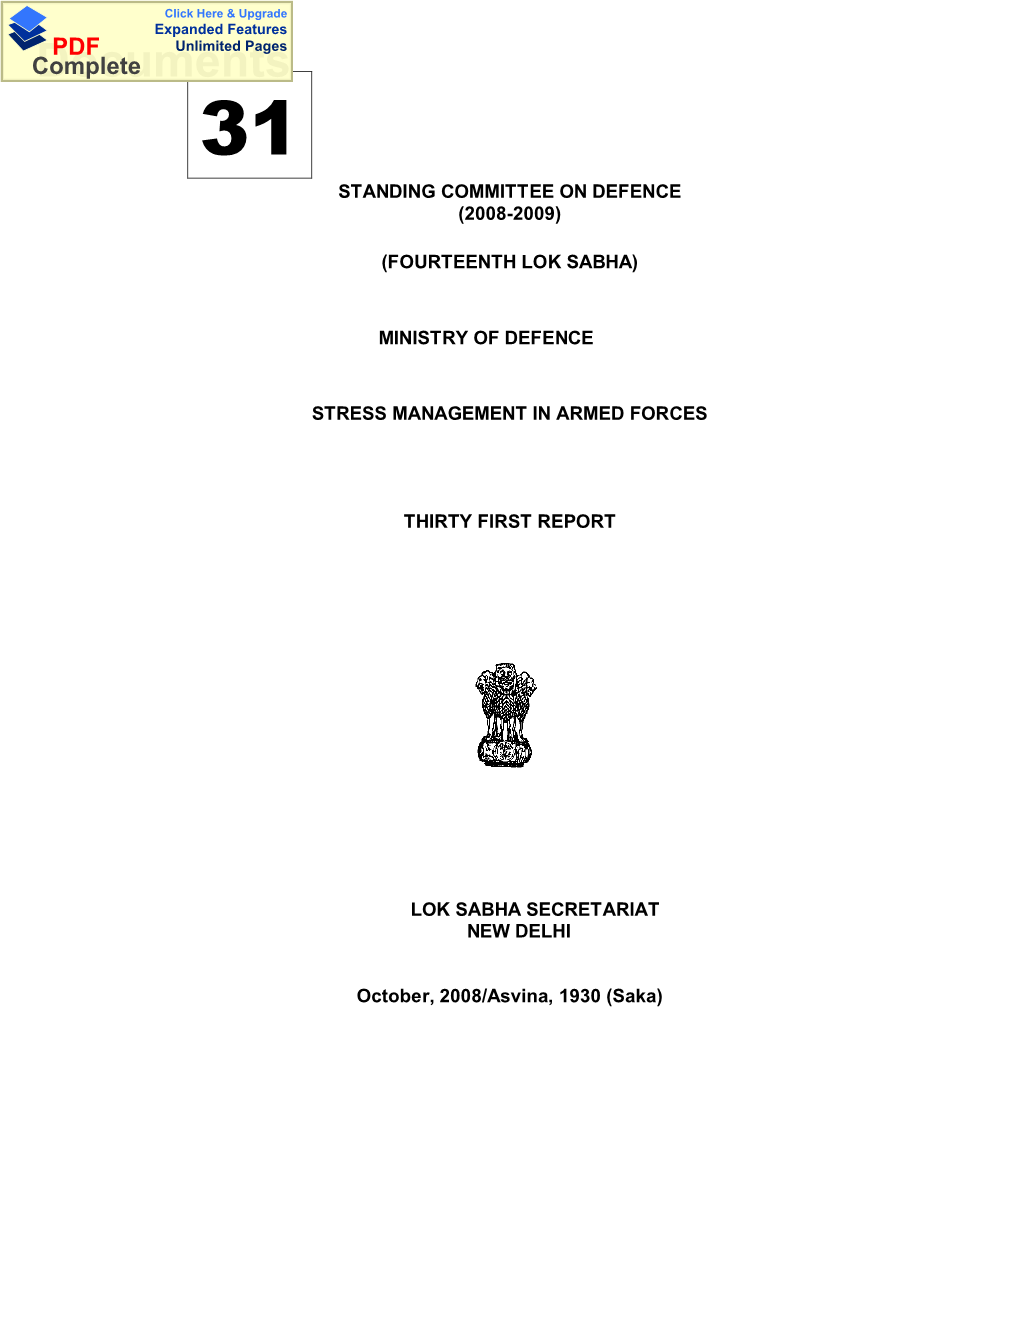 Documents 31 STANDING COMMITTEE on DEFENCE (2008-2009)